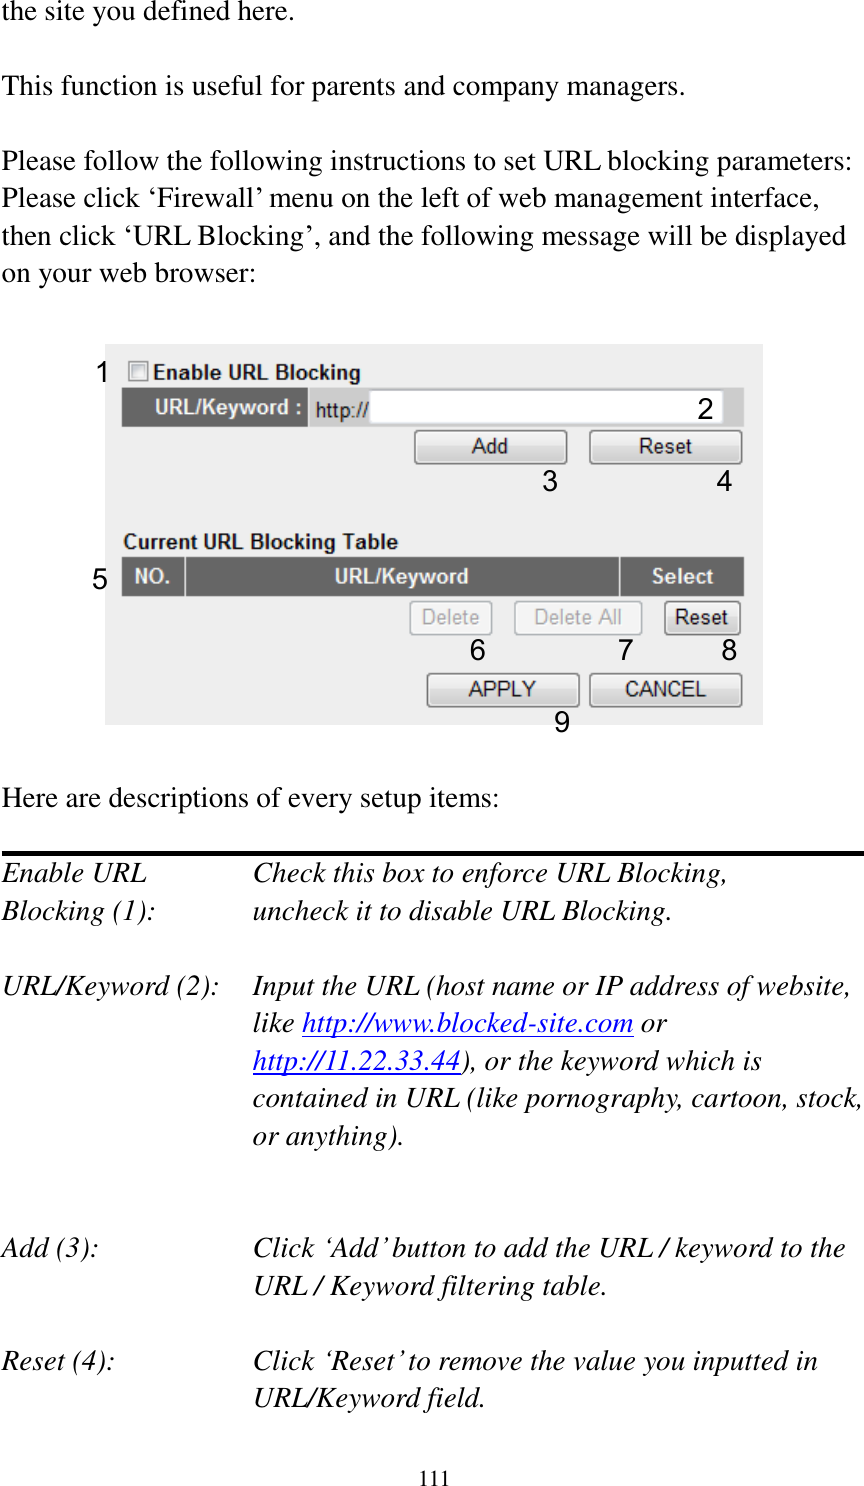 111 the site you defined here.  This function is useful for parents and company managers.  Please follow the following instructions to set URL blocking parameters: Please click „Firewall‟ menu on the left of web management interface, then click „URL Blocking‟, and the following message will be displayed on your web browser:    Here are descriptions of every setup items:  Enable URL      Check this box to enforce URL Blocking, Blocking (1):      uncheck it to disable URL Blocking.  URL/Keyword (2):    Input the URL (host name or IP address of website, like http://www.blocked-site.com or http://11.22.33.44), or the keyword which is contained in URL (like pornography, cartoon, stock, or anything).   Add (3):    Click „Add‟ button to add the URL / keyword to the URL / Keyword filtering table.  Reset (4):    Click „Reset‟ to remove the value you inputted in URL/Keyword field. 2 3 4 5 6 7 8 9 1 